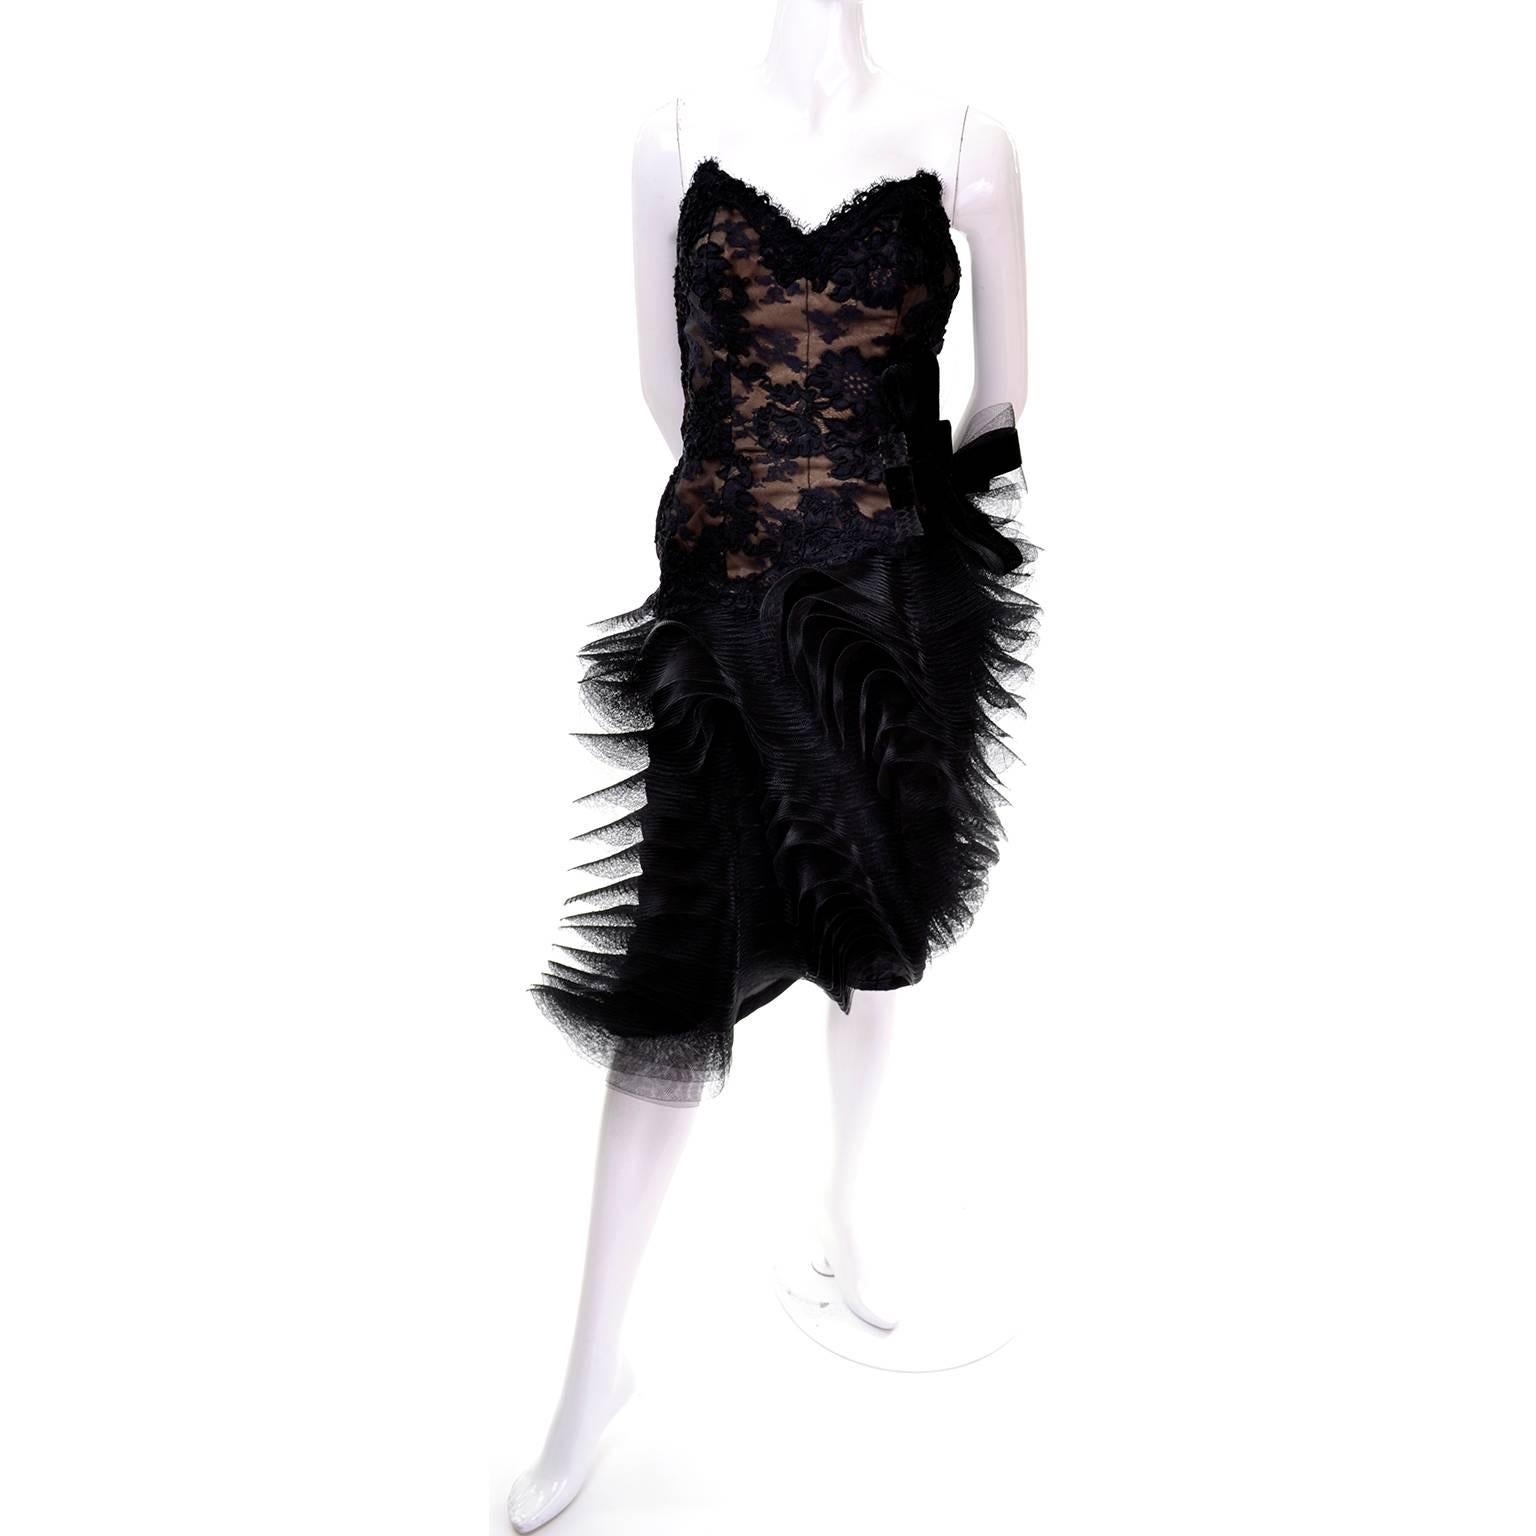 This incredible vintage Victor Costa strapless evening dress was purchased at The Salon at Elizabeth Arden in the 1980's. This stunning dress has an incredible skirt with layers of beautifully sculpted tulle. The sweetheart strapless bodice has